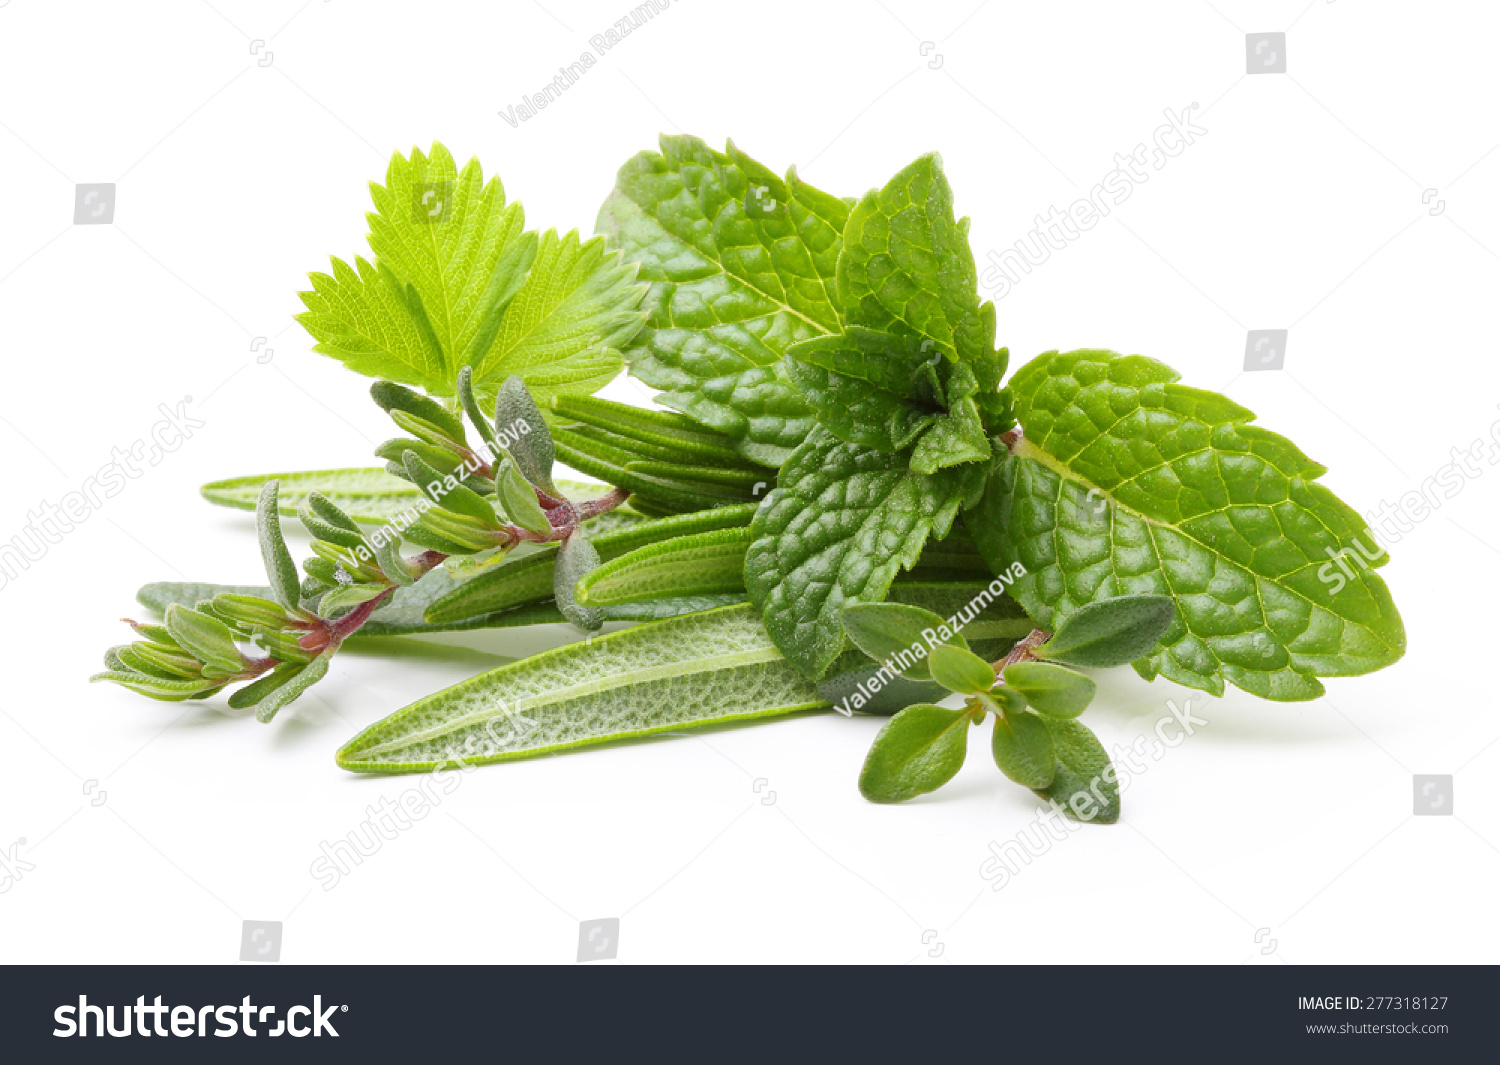 Fresh spices and herbs isolated on white background #277318127